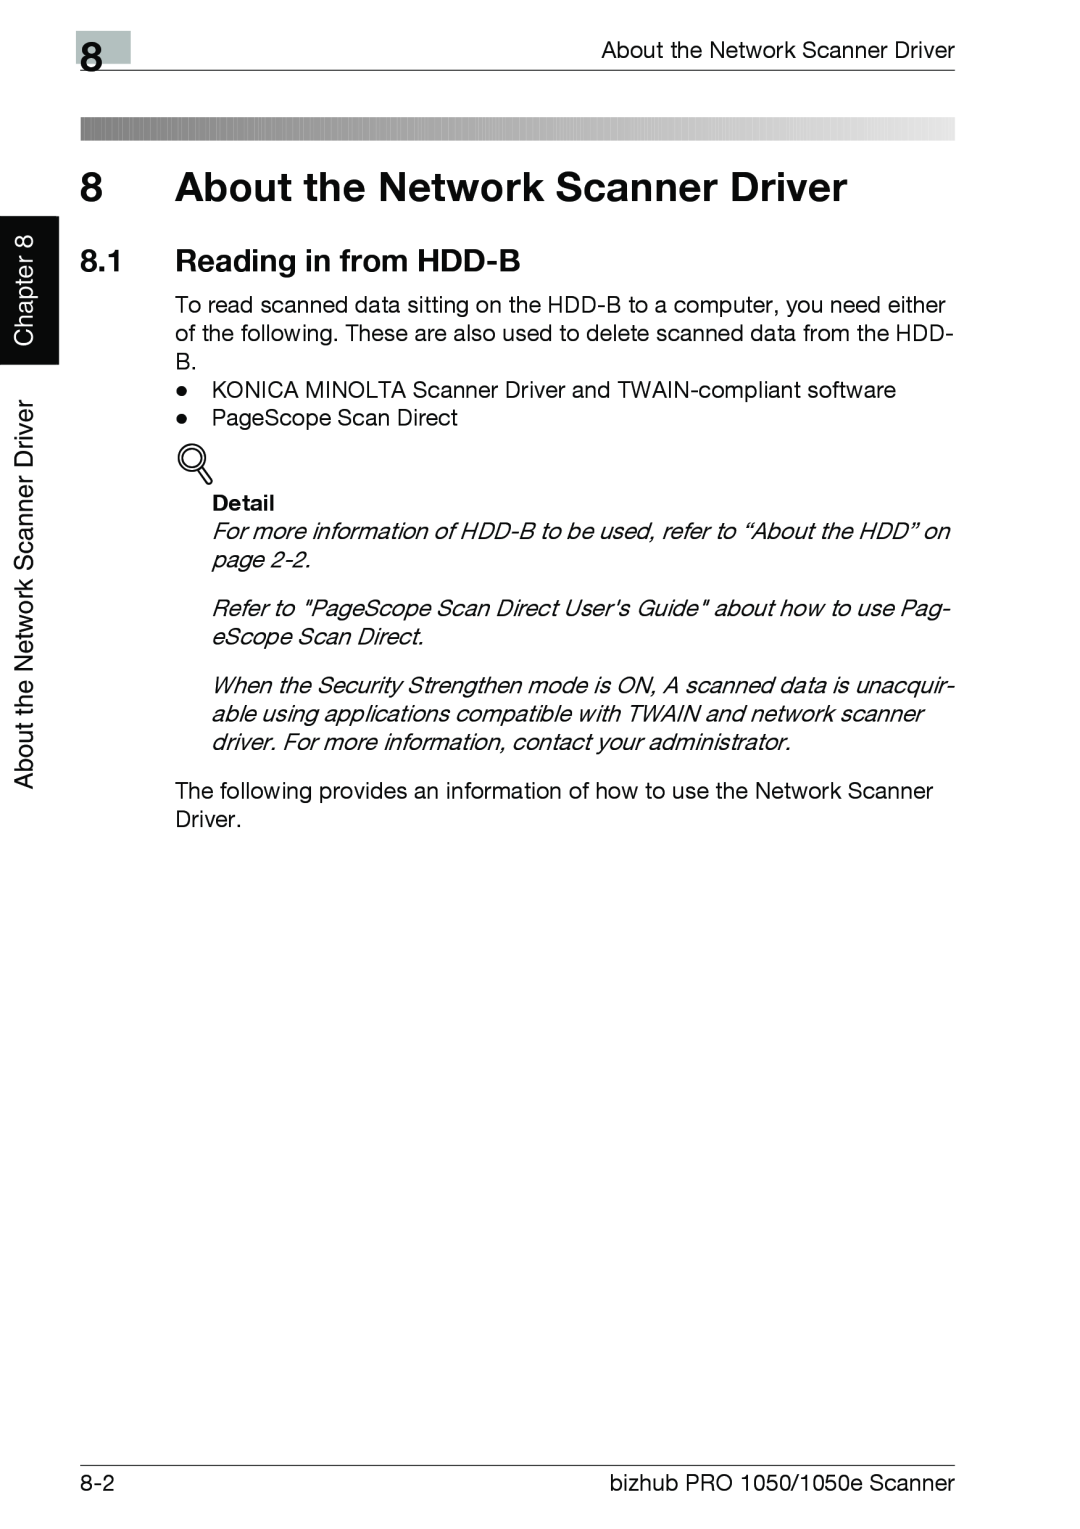 Konica Minolta 1050E appendix 8.1Reading in from HDD-B, About the Network Scanner Driver, Chapter, Detail 